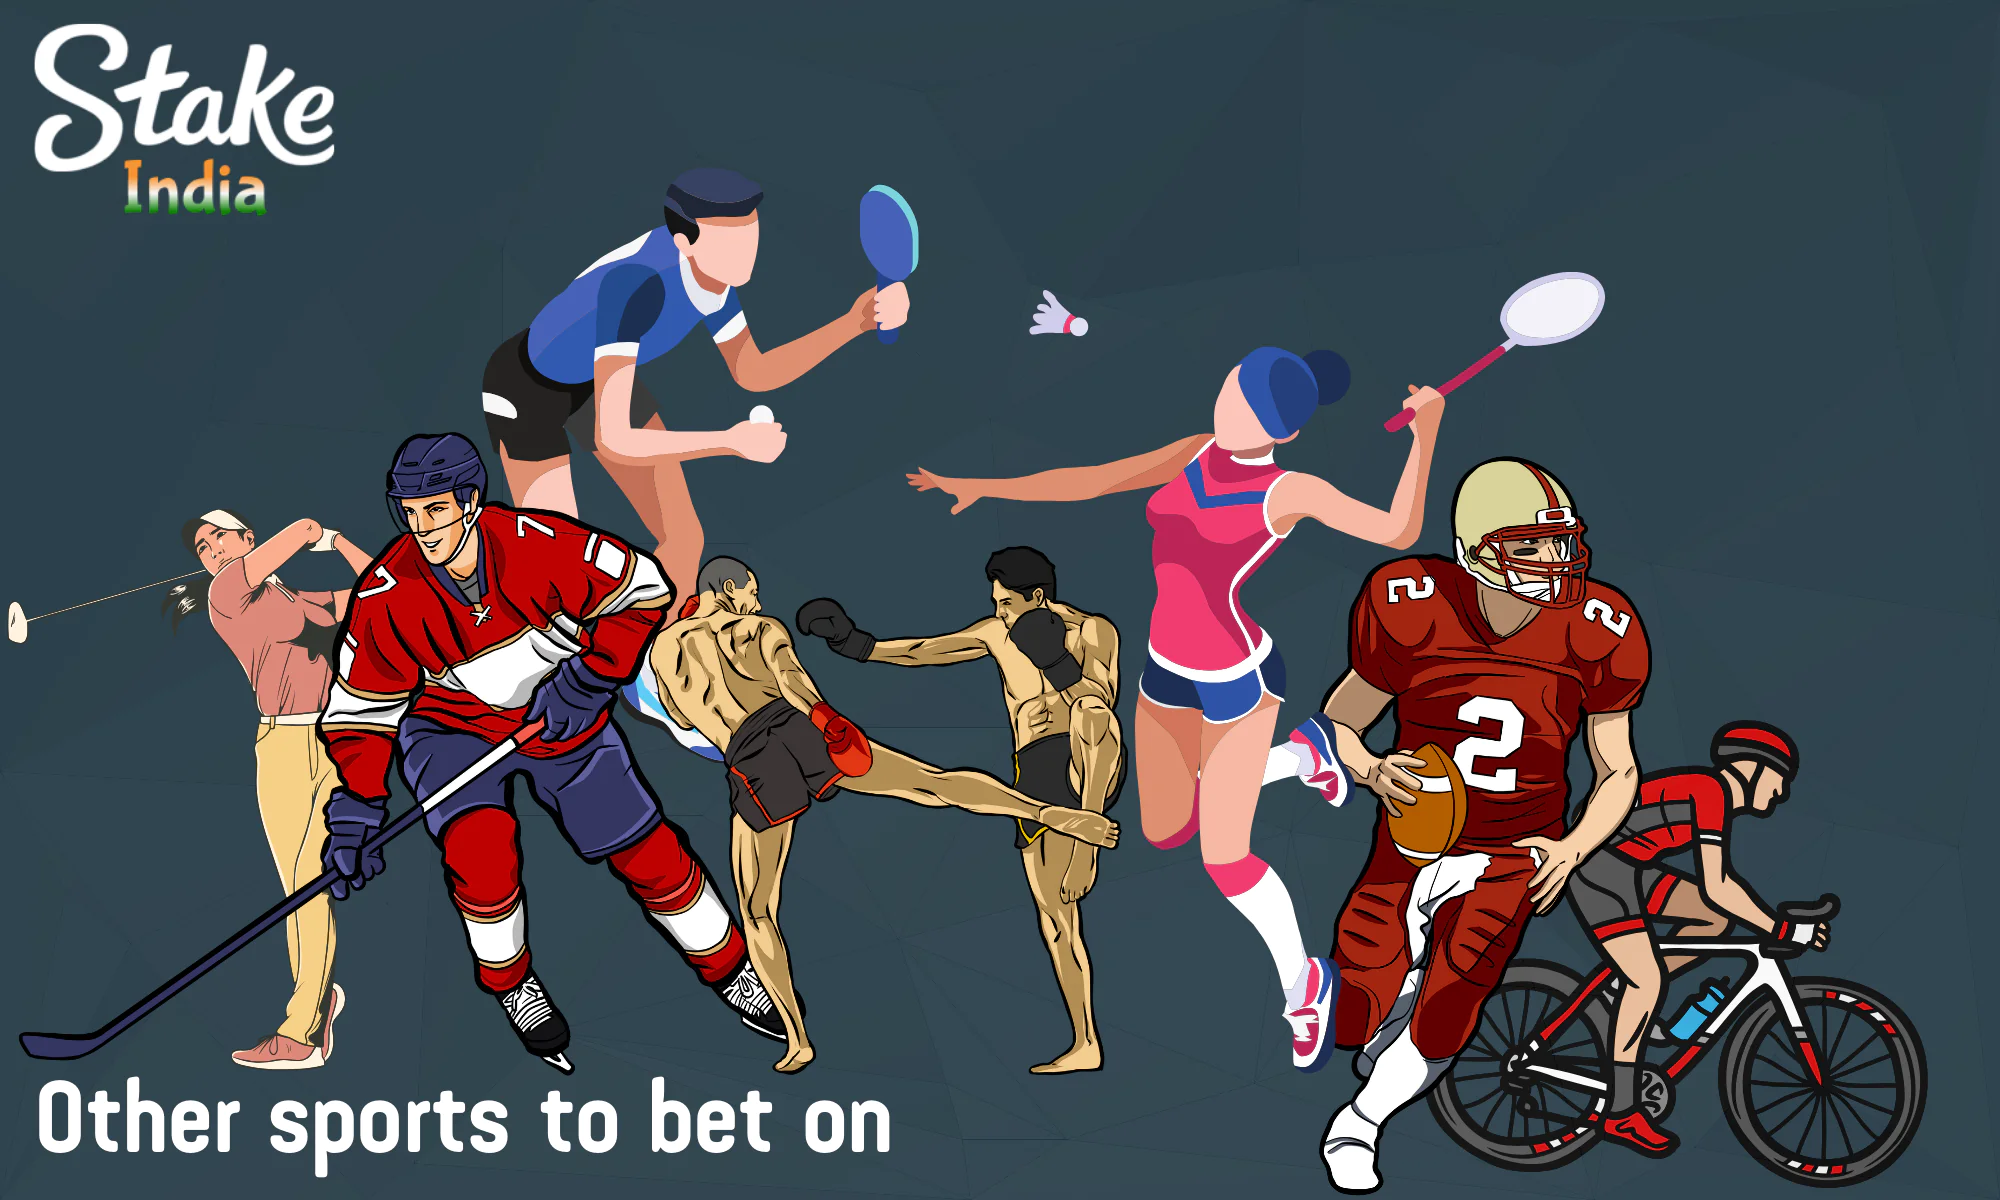 Stake offers players from India a wide variety of sports events to bet on